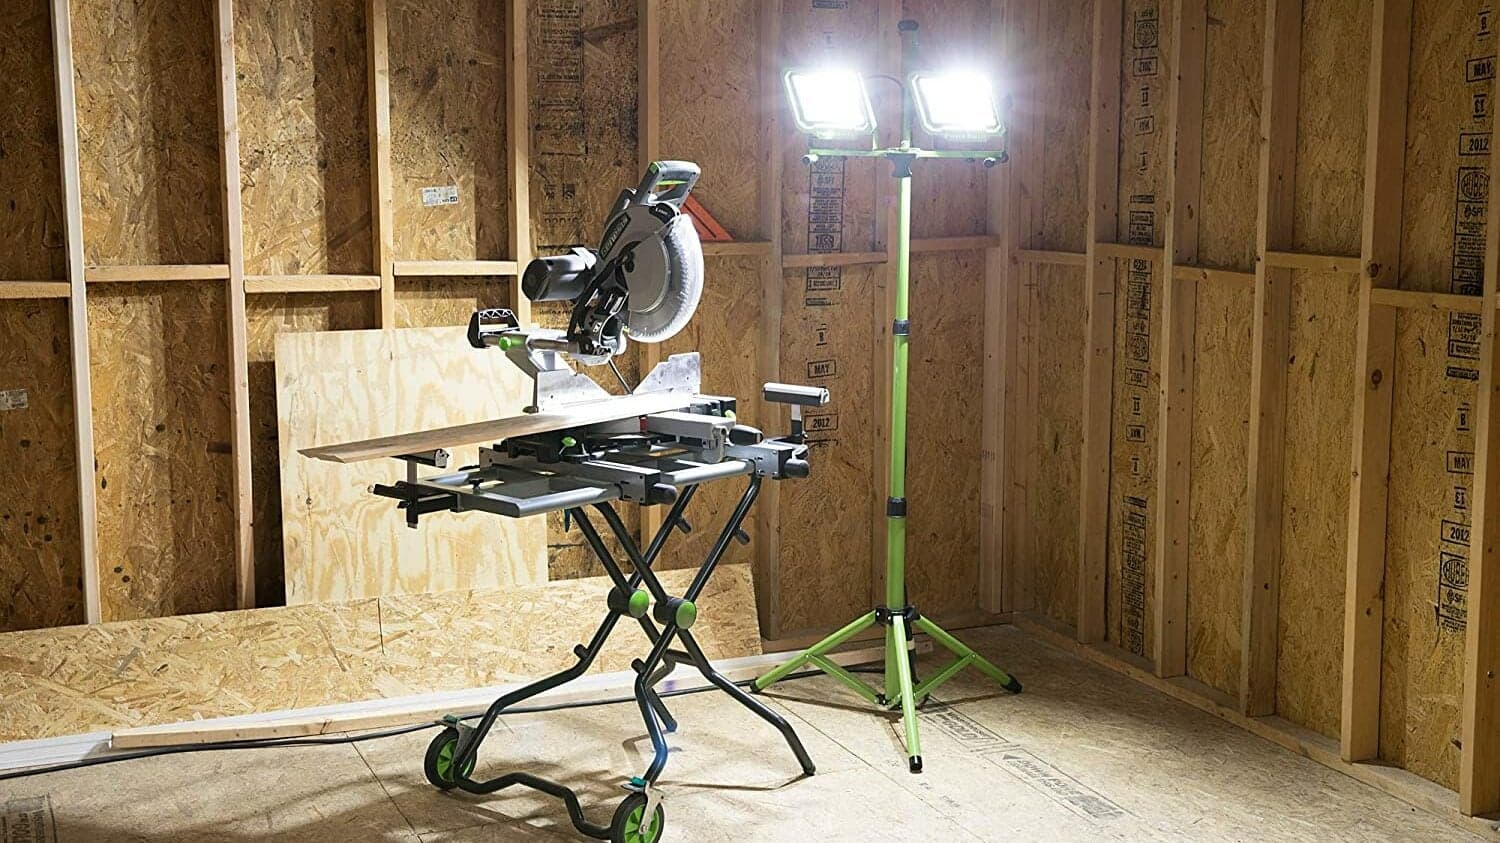 Best LED Work Lights: See Better While Working